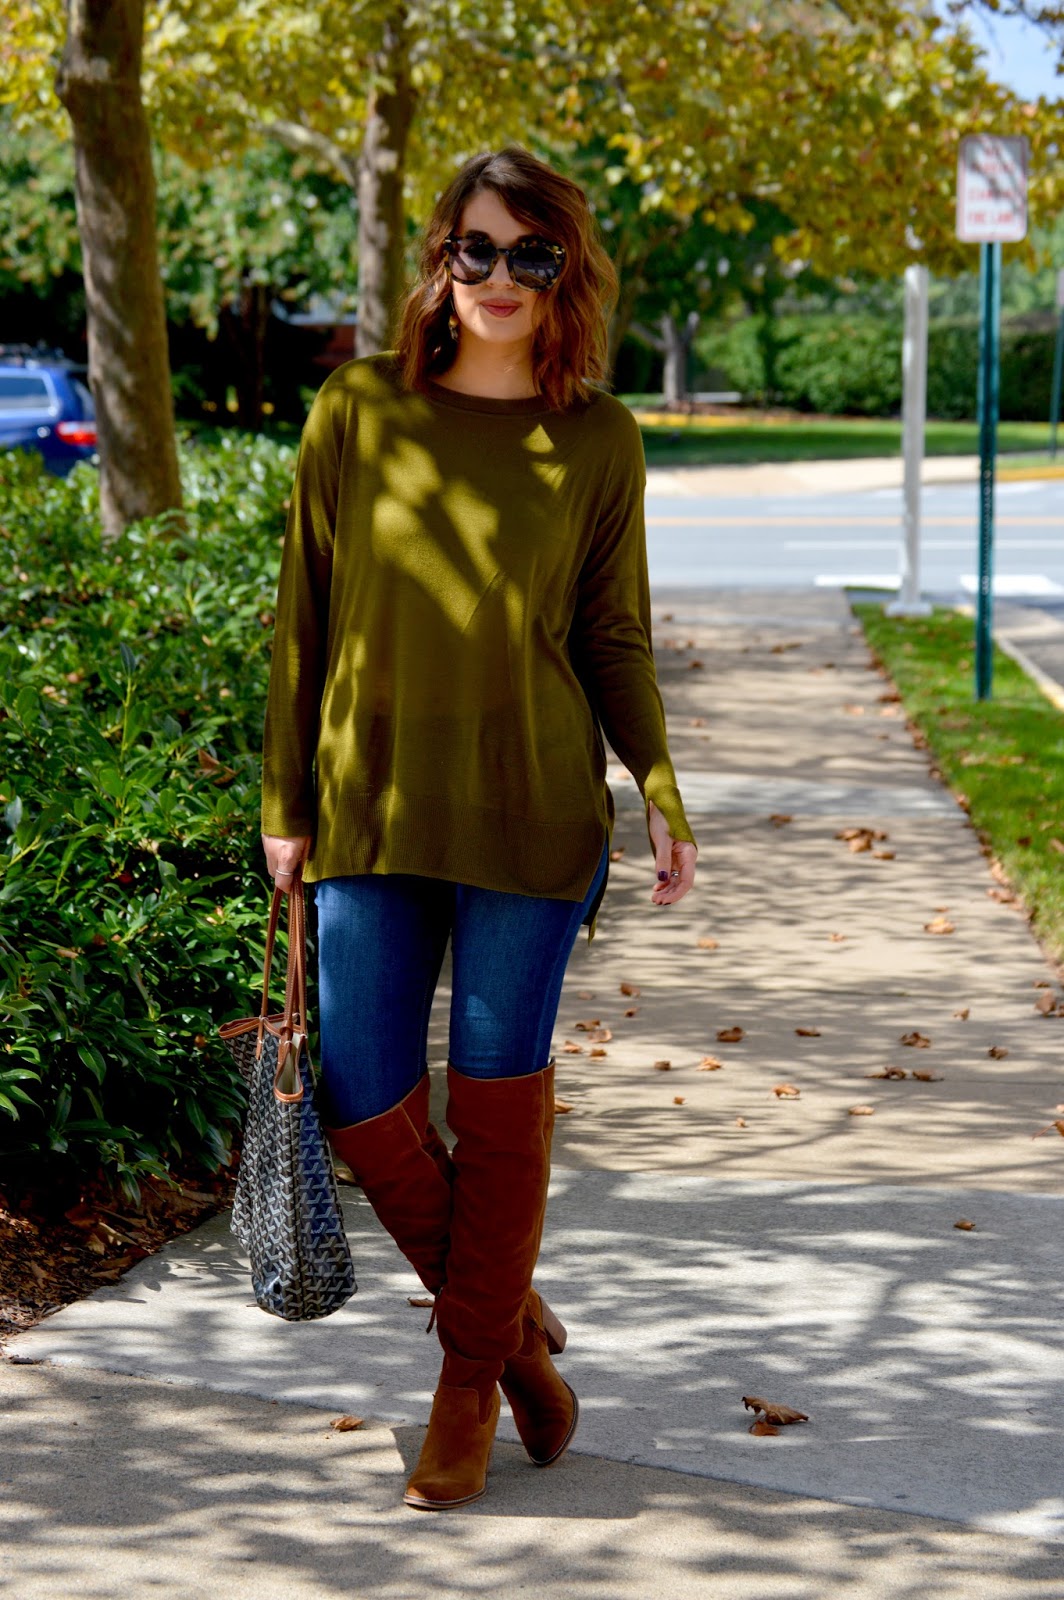 Rosy Outlook: Fall Hues + Fashion Frenzy Link-Up